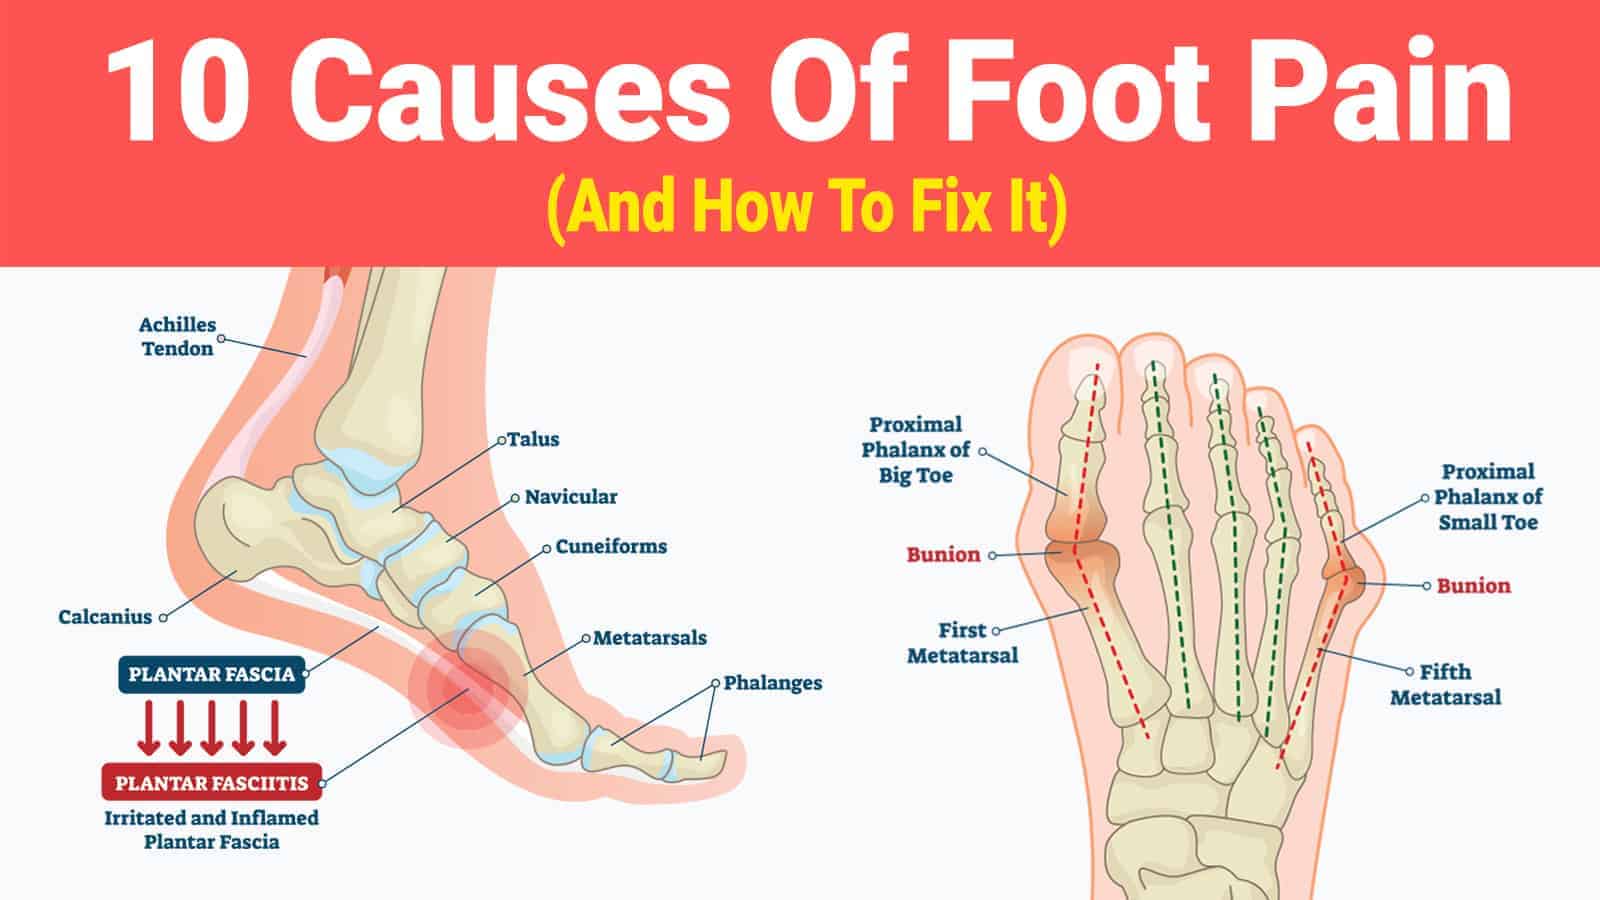 10 Causes Of Foot Pain (And How To Fix It)